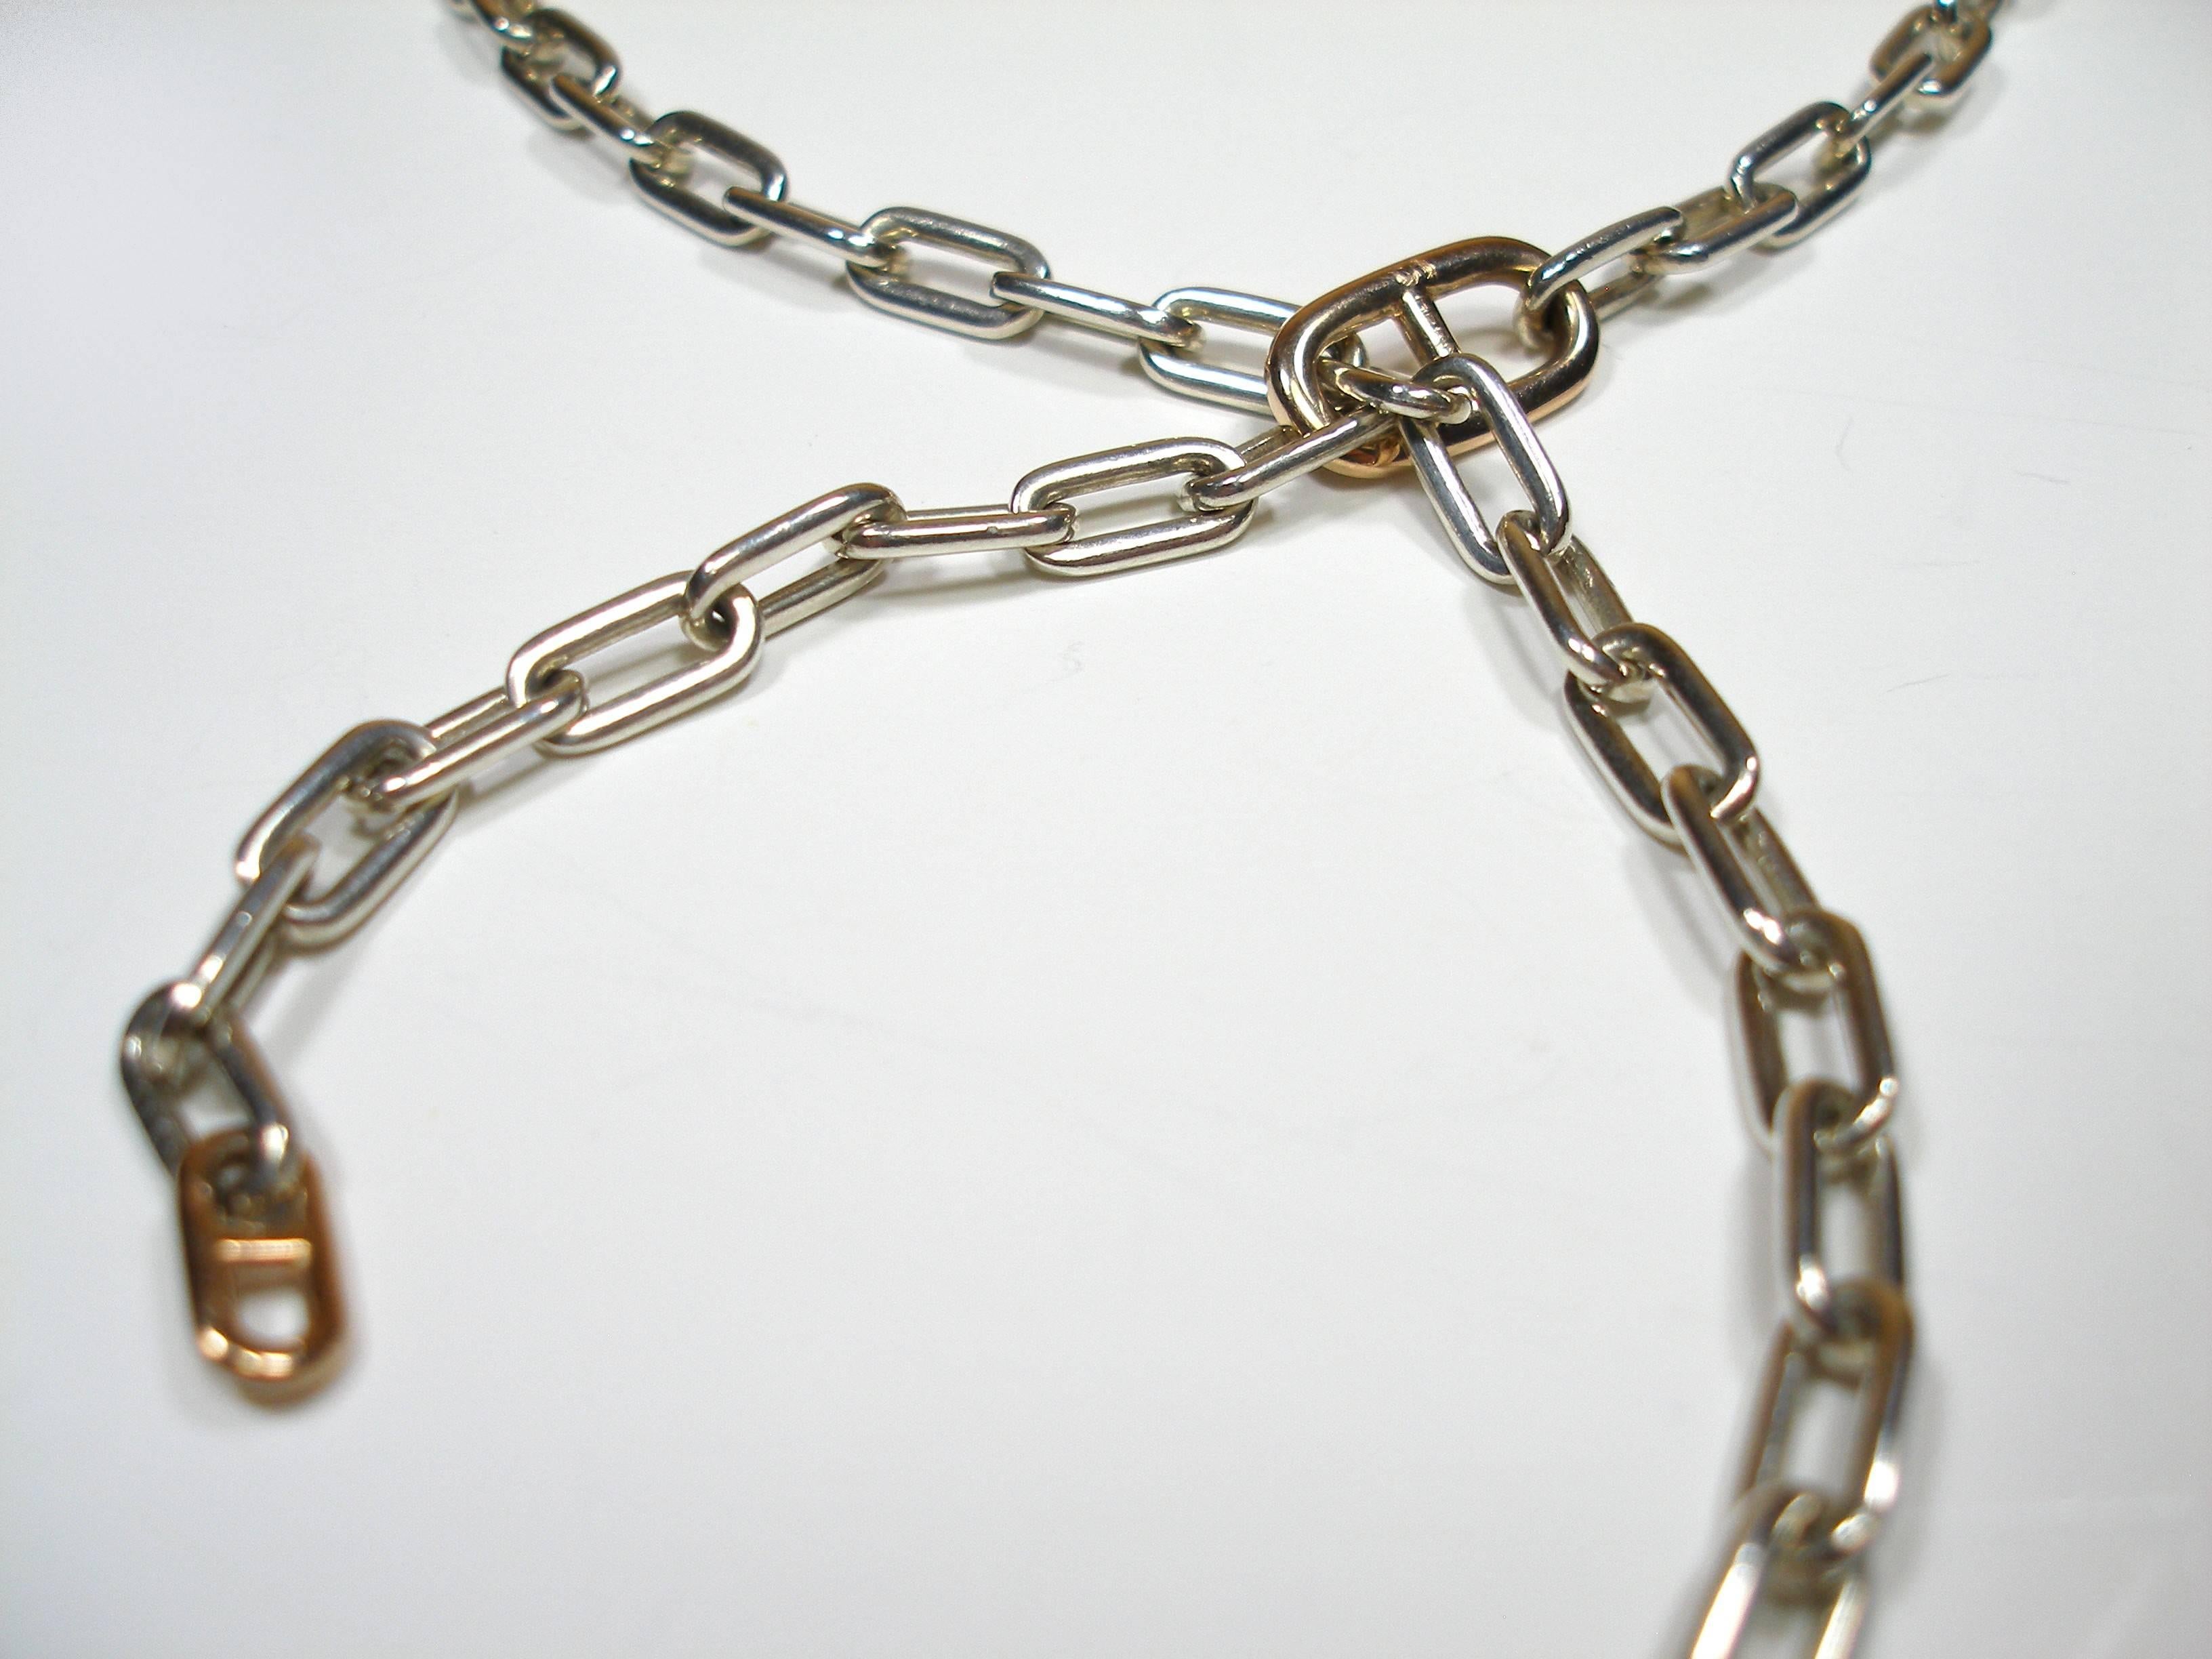 Rare Long necklace Hermès 
Modéle Feria
Ajustable
Signed Hermès 
Weight : 50 grammes
Silver 925 et gold 18 k ( 3 links )
Good Condition
Its comes with Hermès box and ribbon for XMAS
Thank you for visiting my shop !